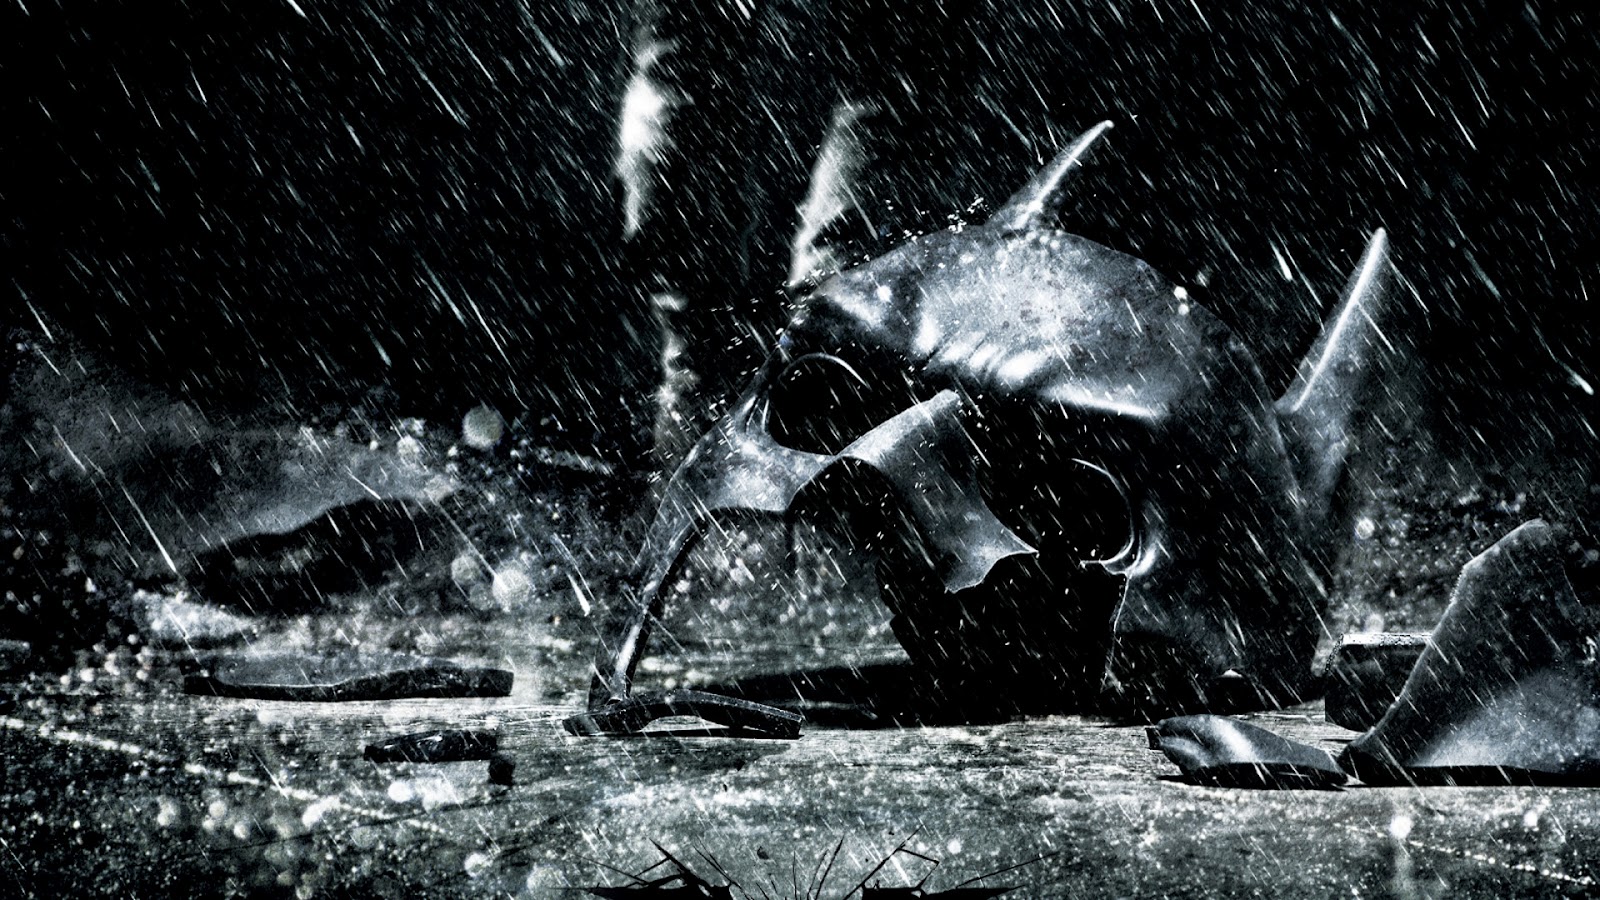 The Dark Knight Rises 02 1920x1080 New Movies Wallpapers